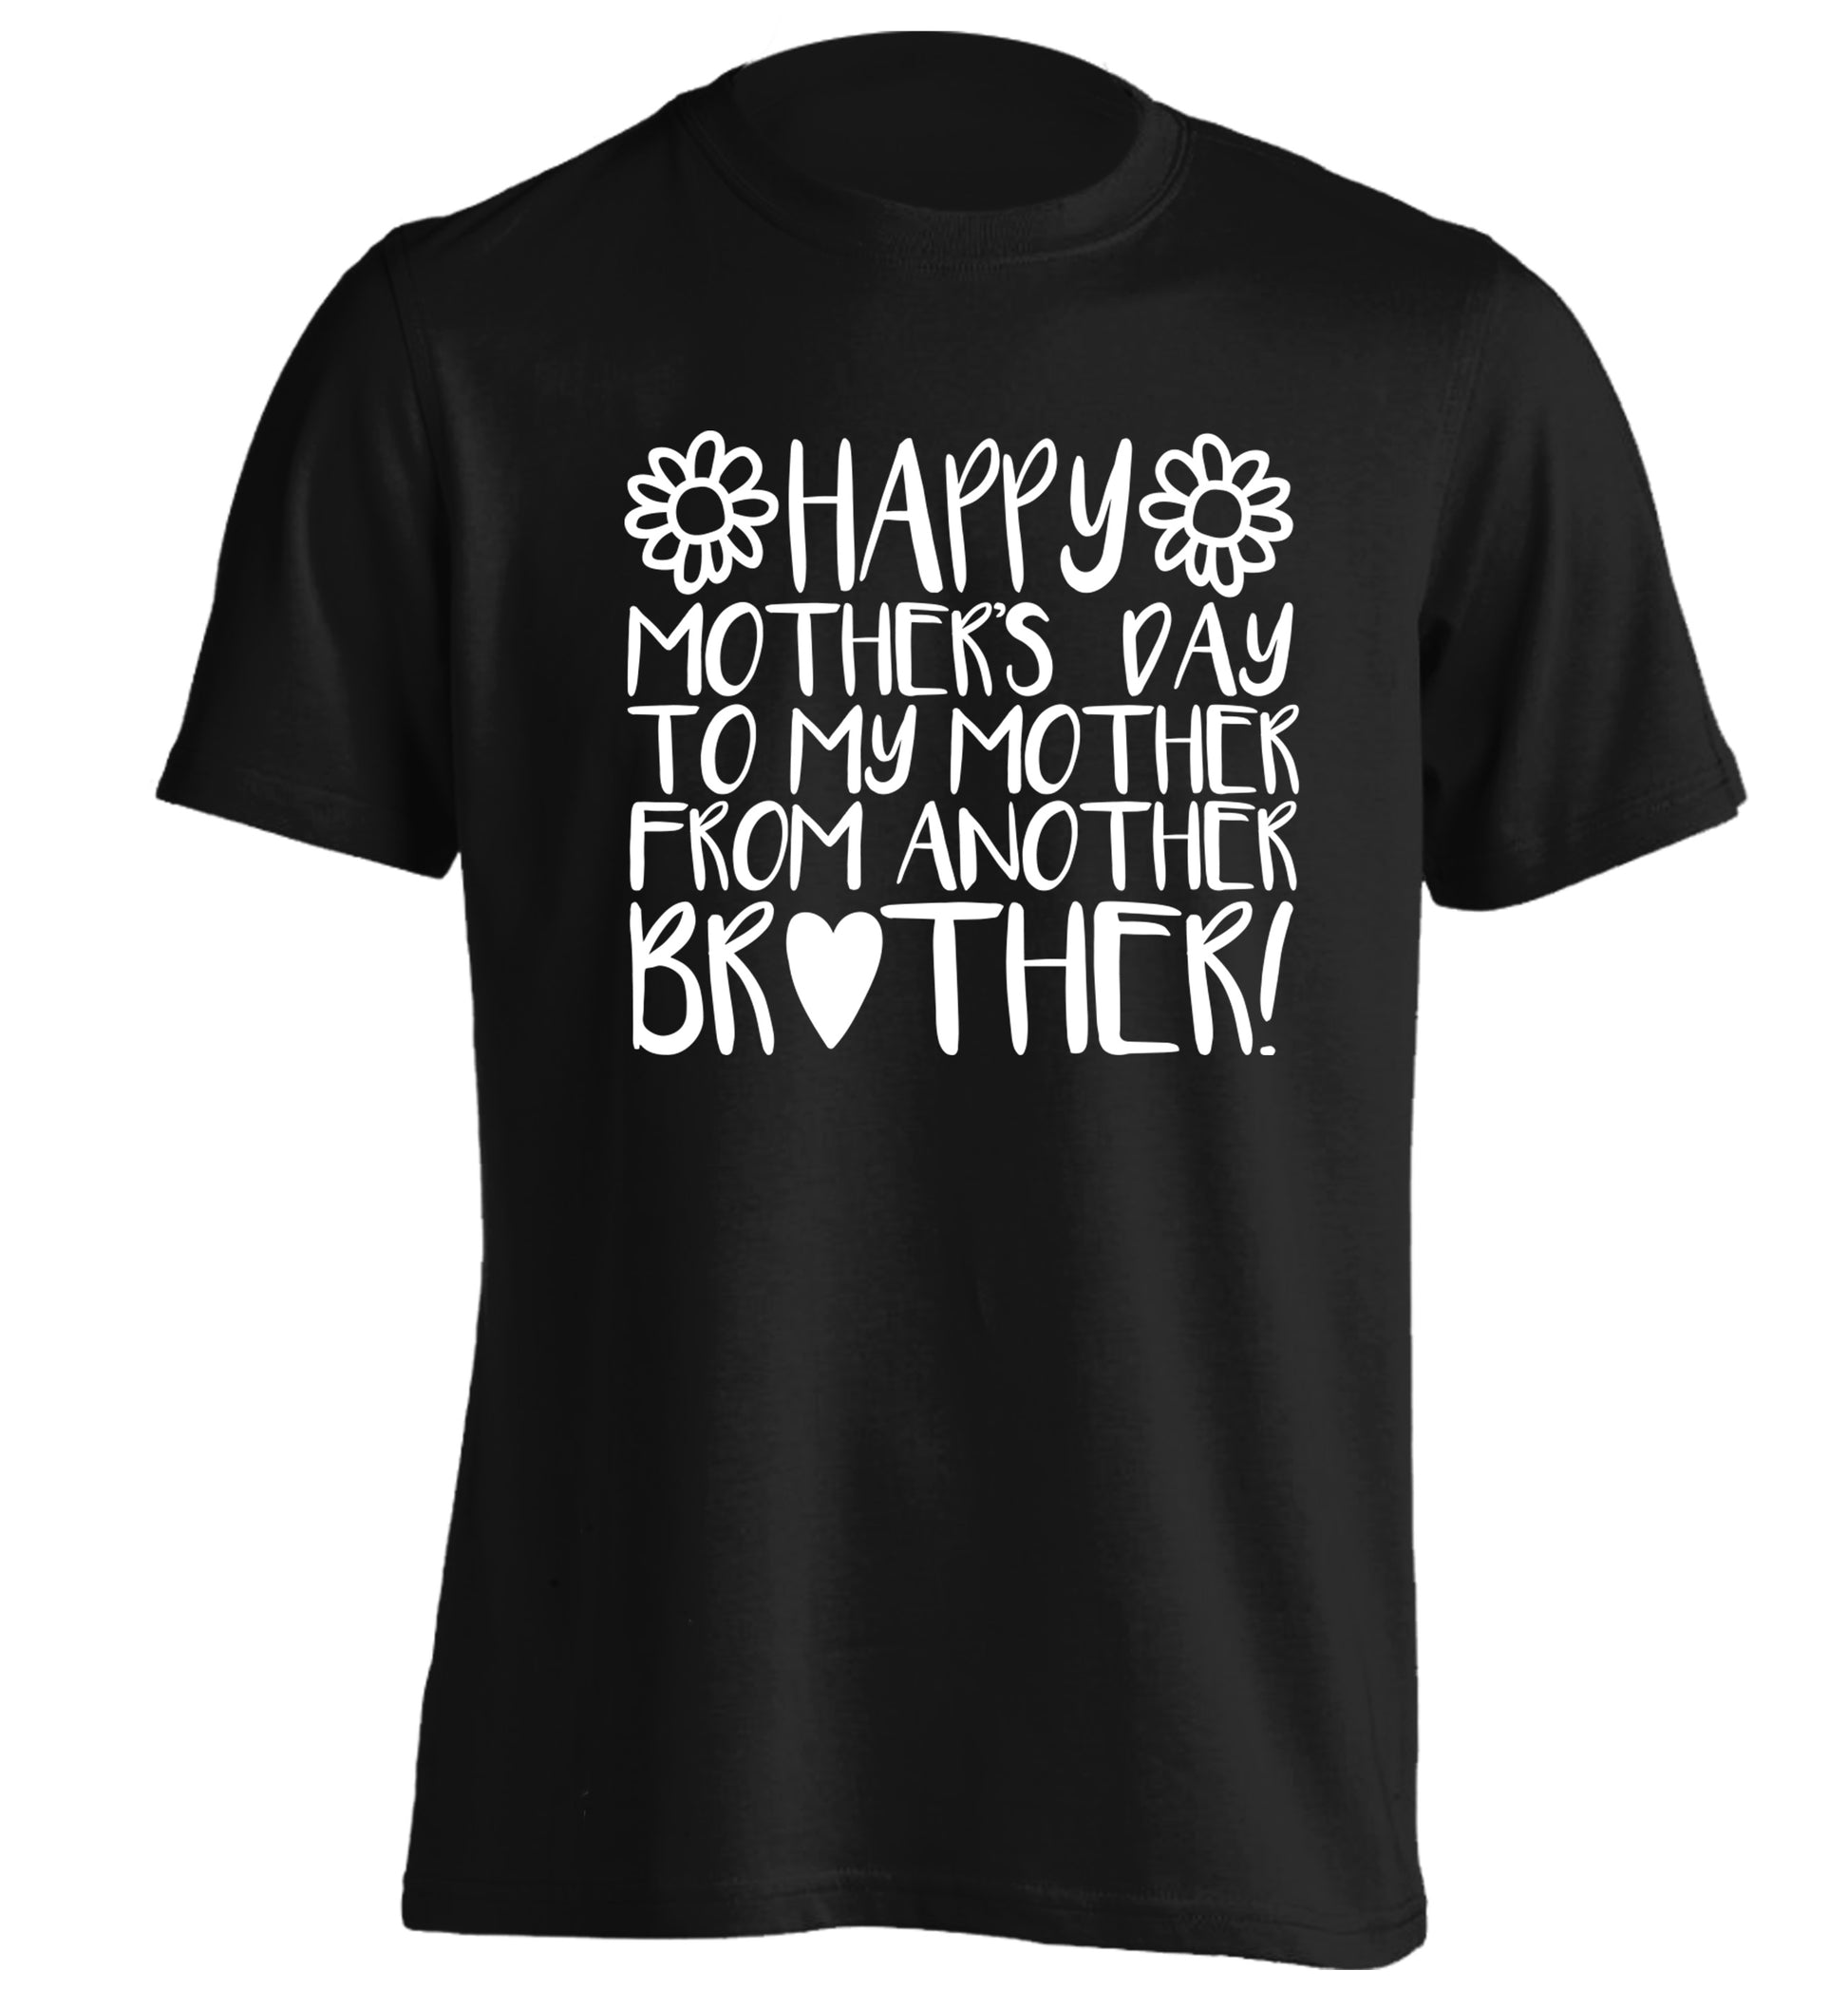 Happy mother's day to my mother from another brother adults unisex black Tshirt 2XL